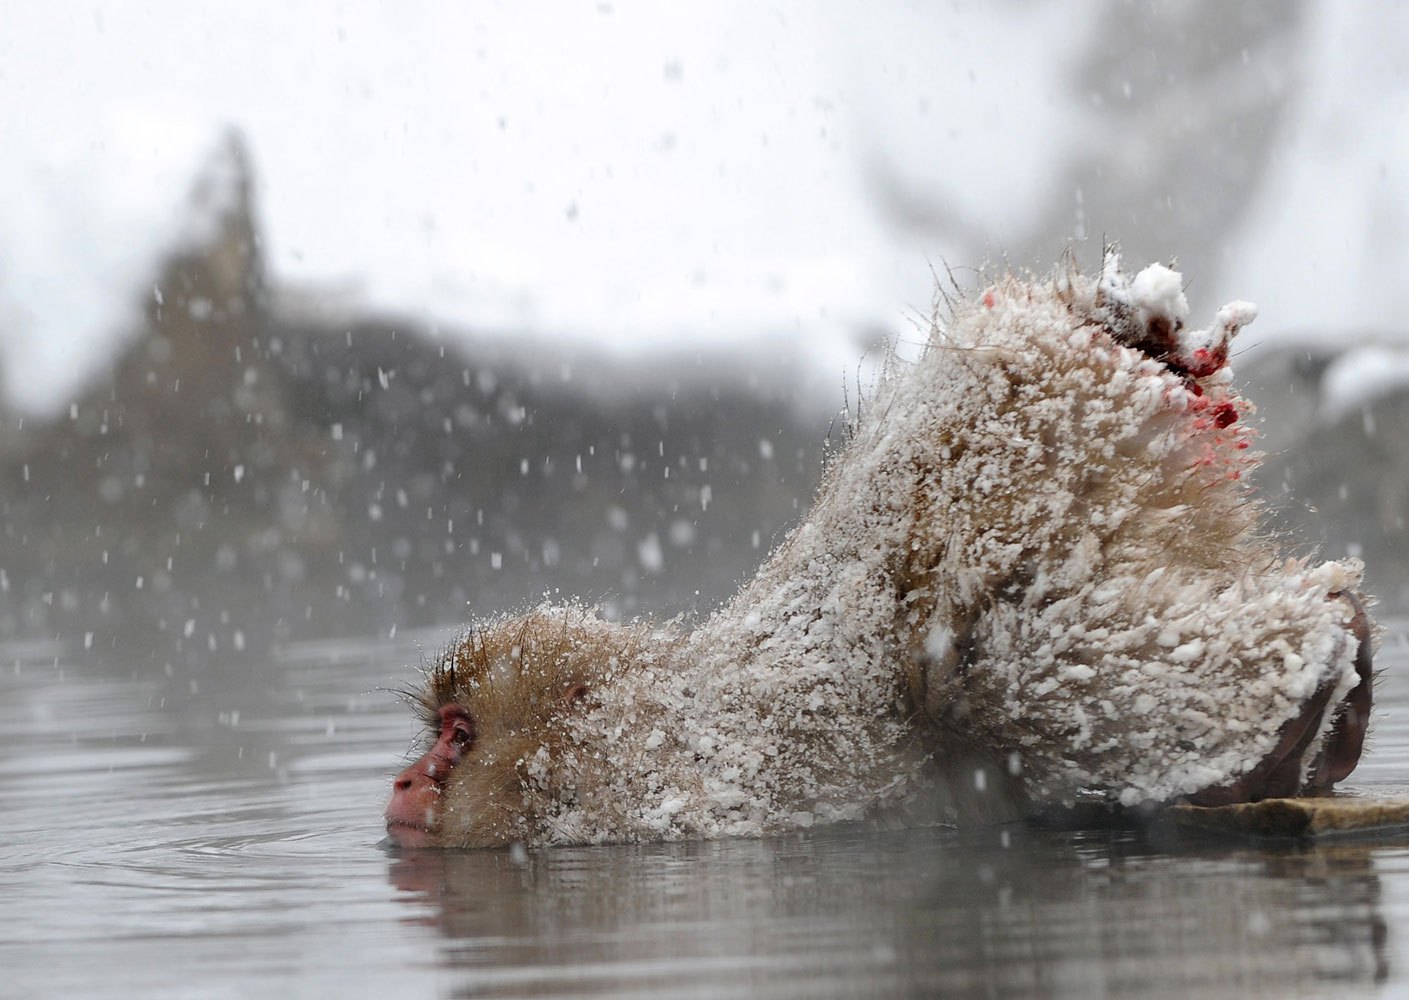 A Japanese macaque monkey, known as a  snow monkey,  takes an open-air hot spring bath while snowflakes fall at the Jigokudani Monkey Park in the town of Yamanouchi, Nagano prefecture on Jan. 19, 2014.